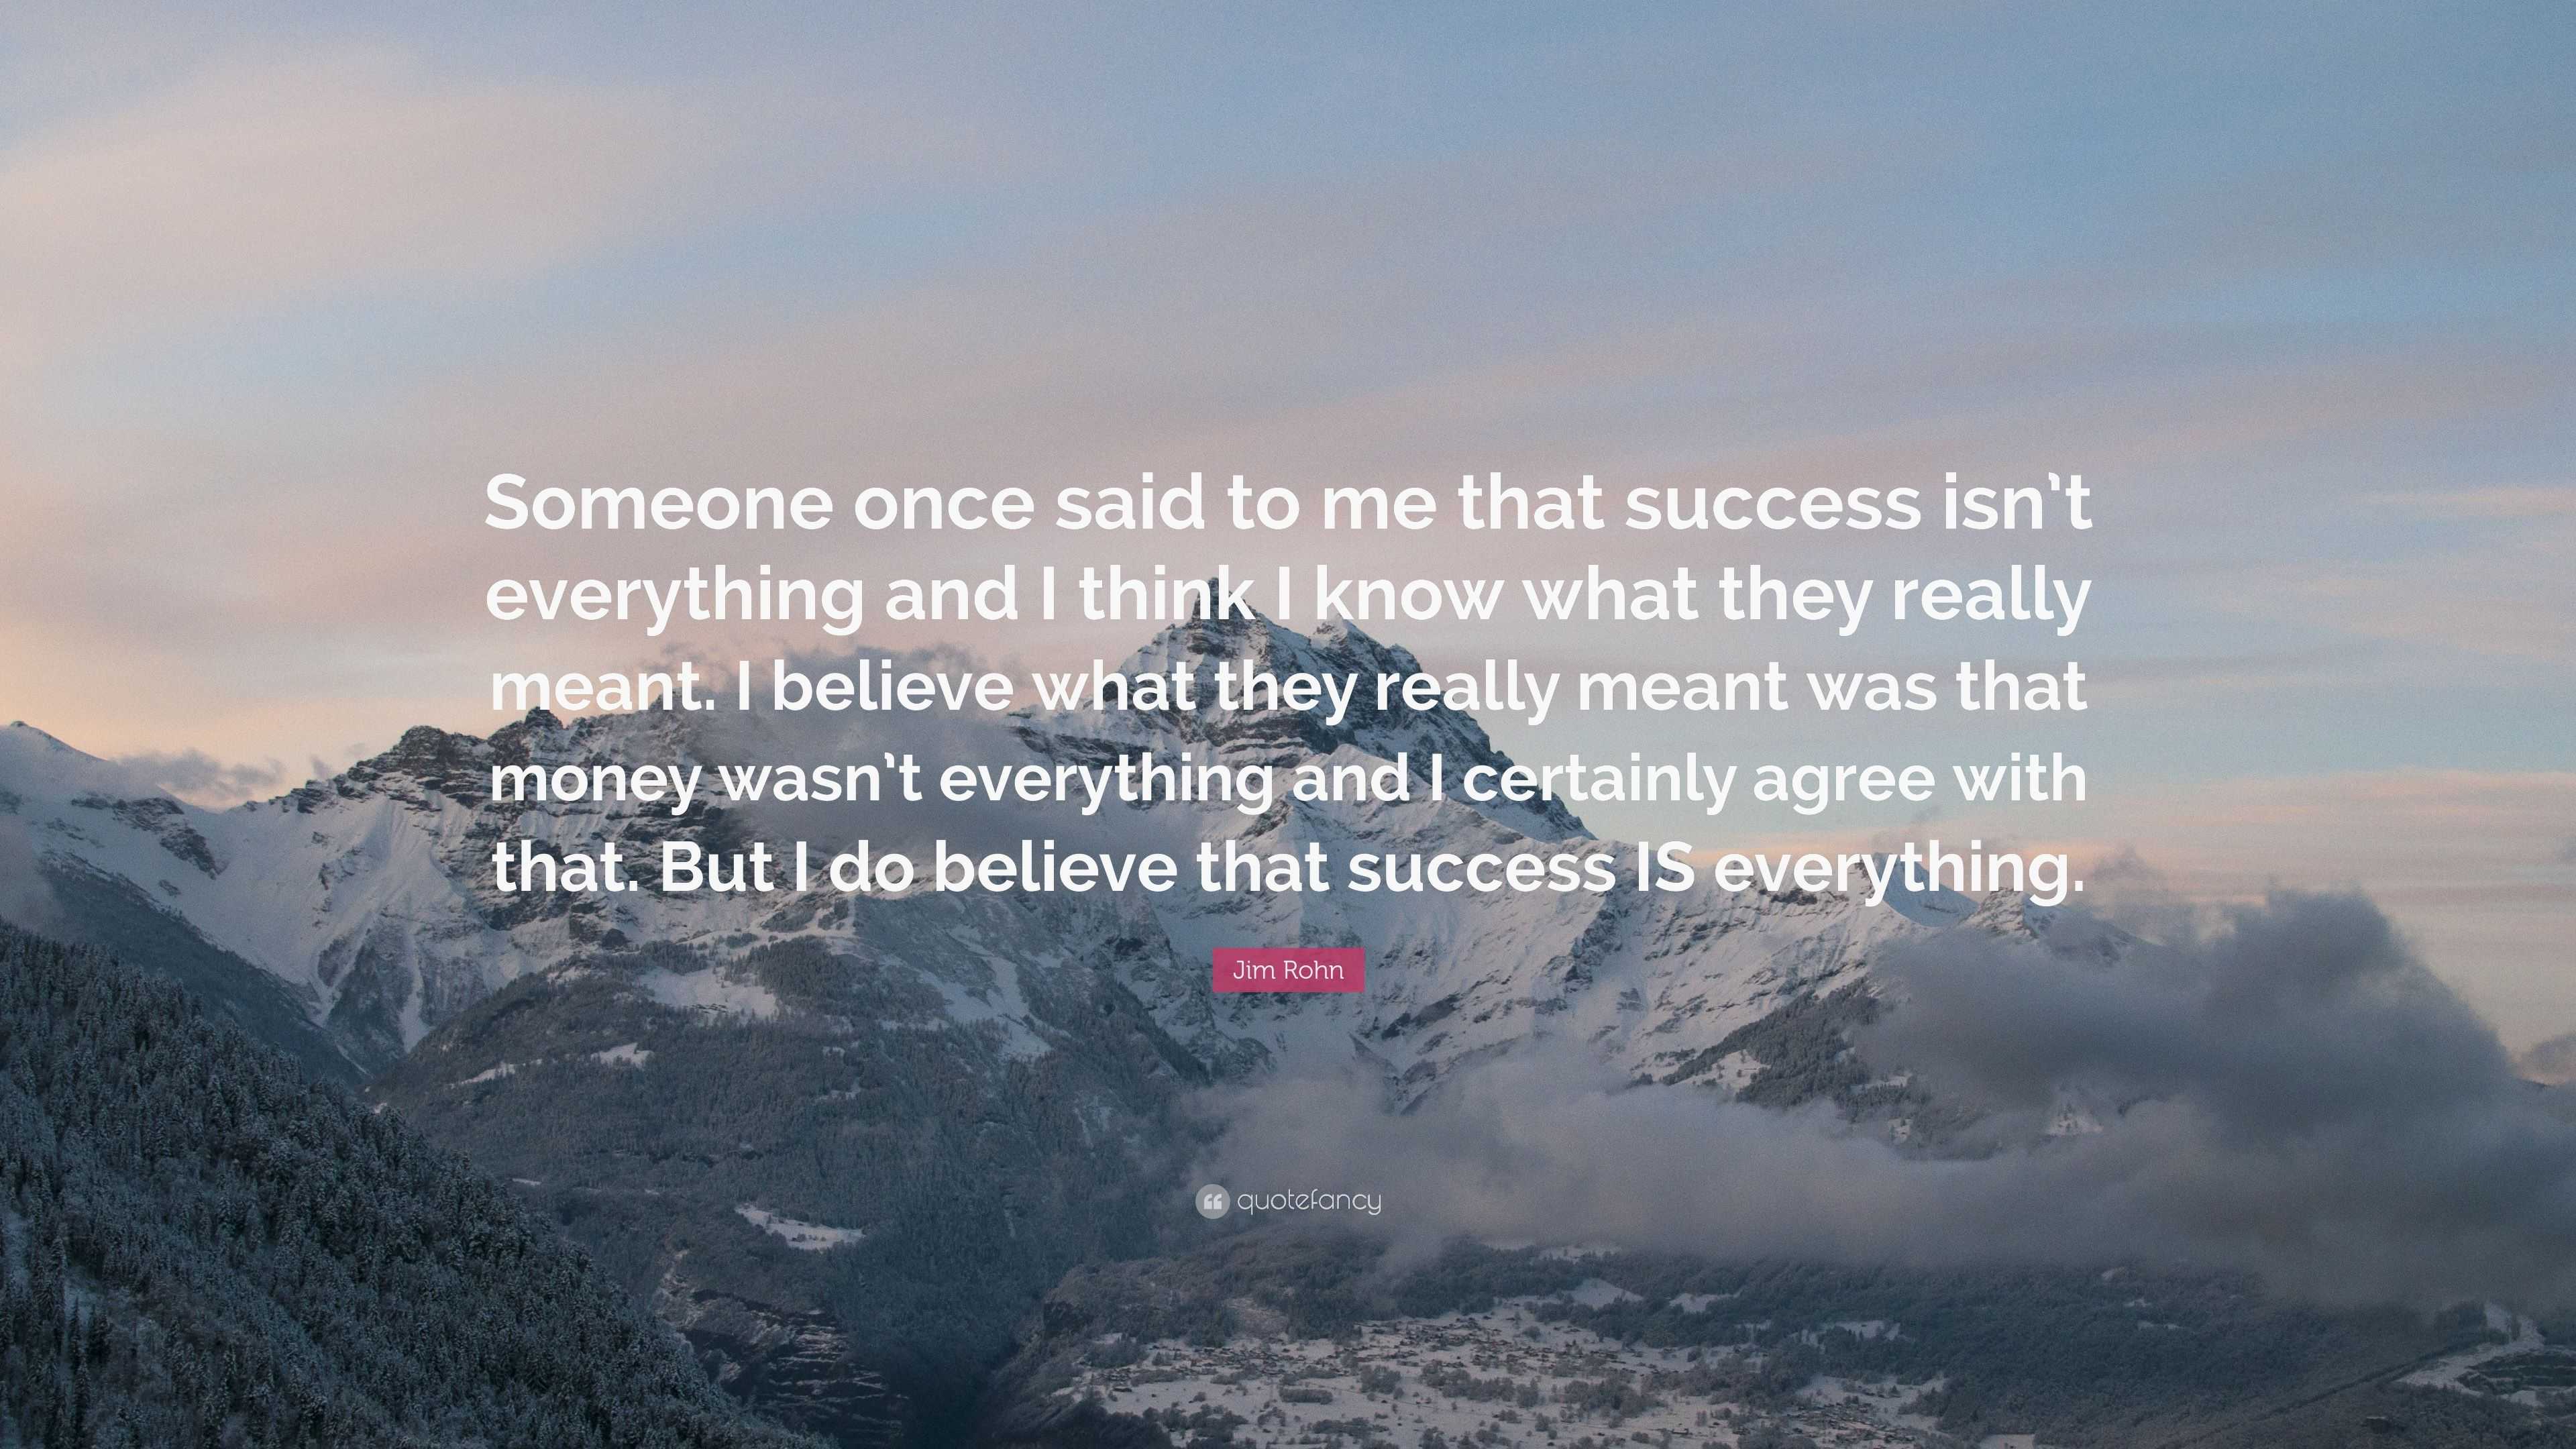 Jim Rohn Quote: “Someone once said to me that success isn’t everything ...